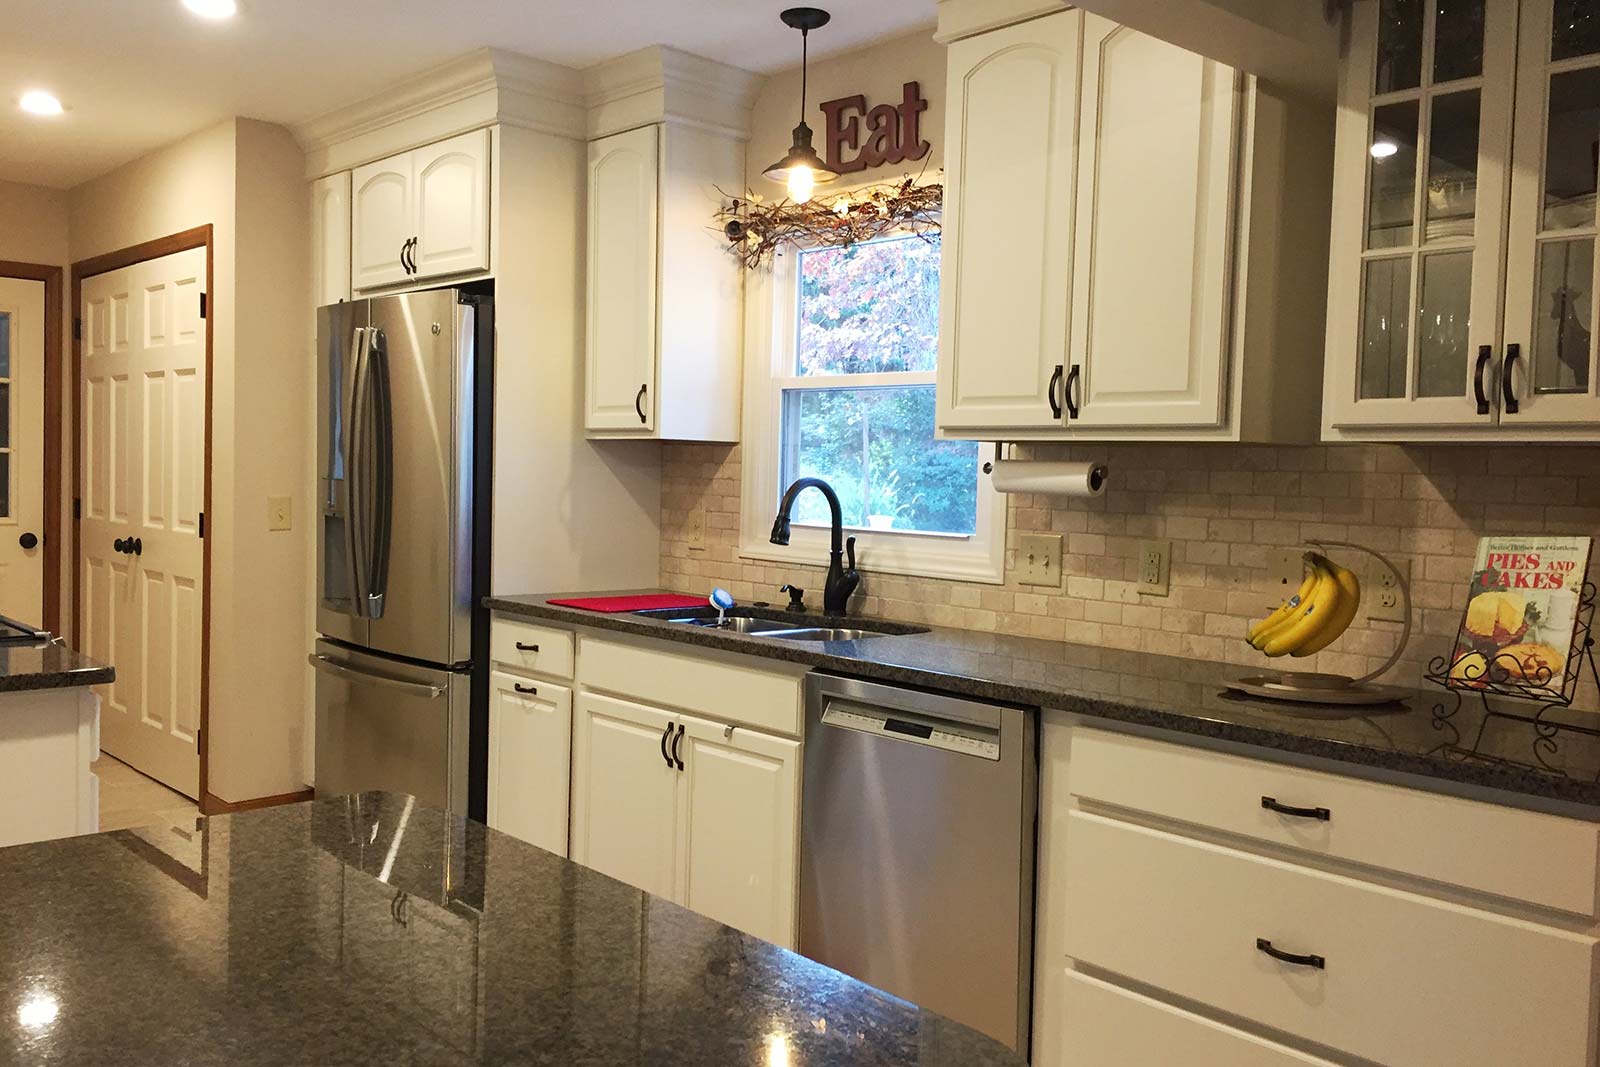 Kitchen remodeled with black granite countertops